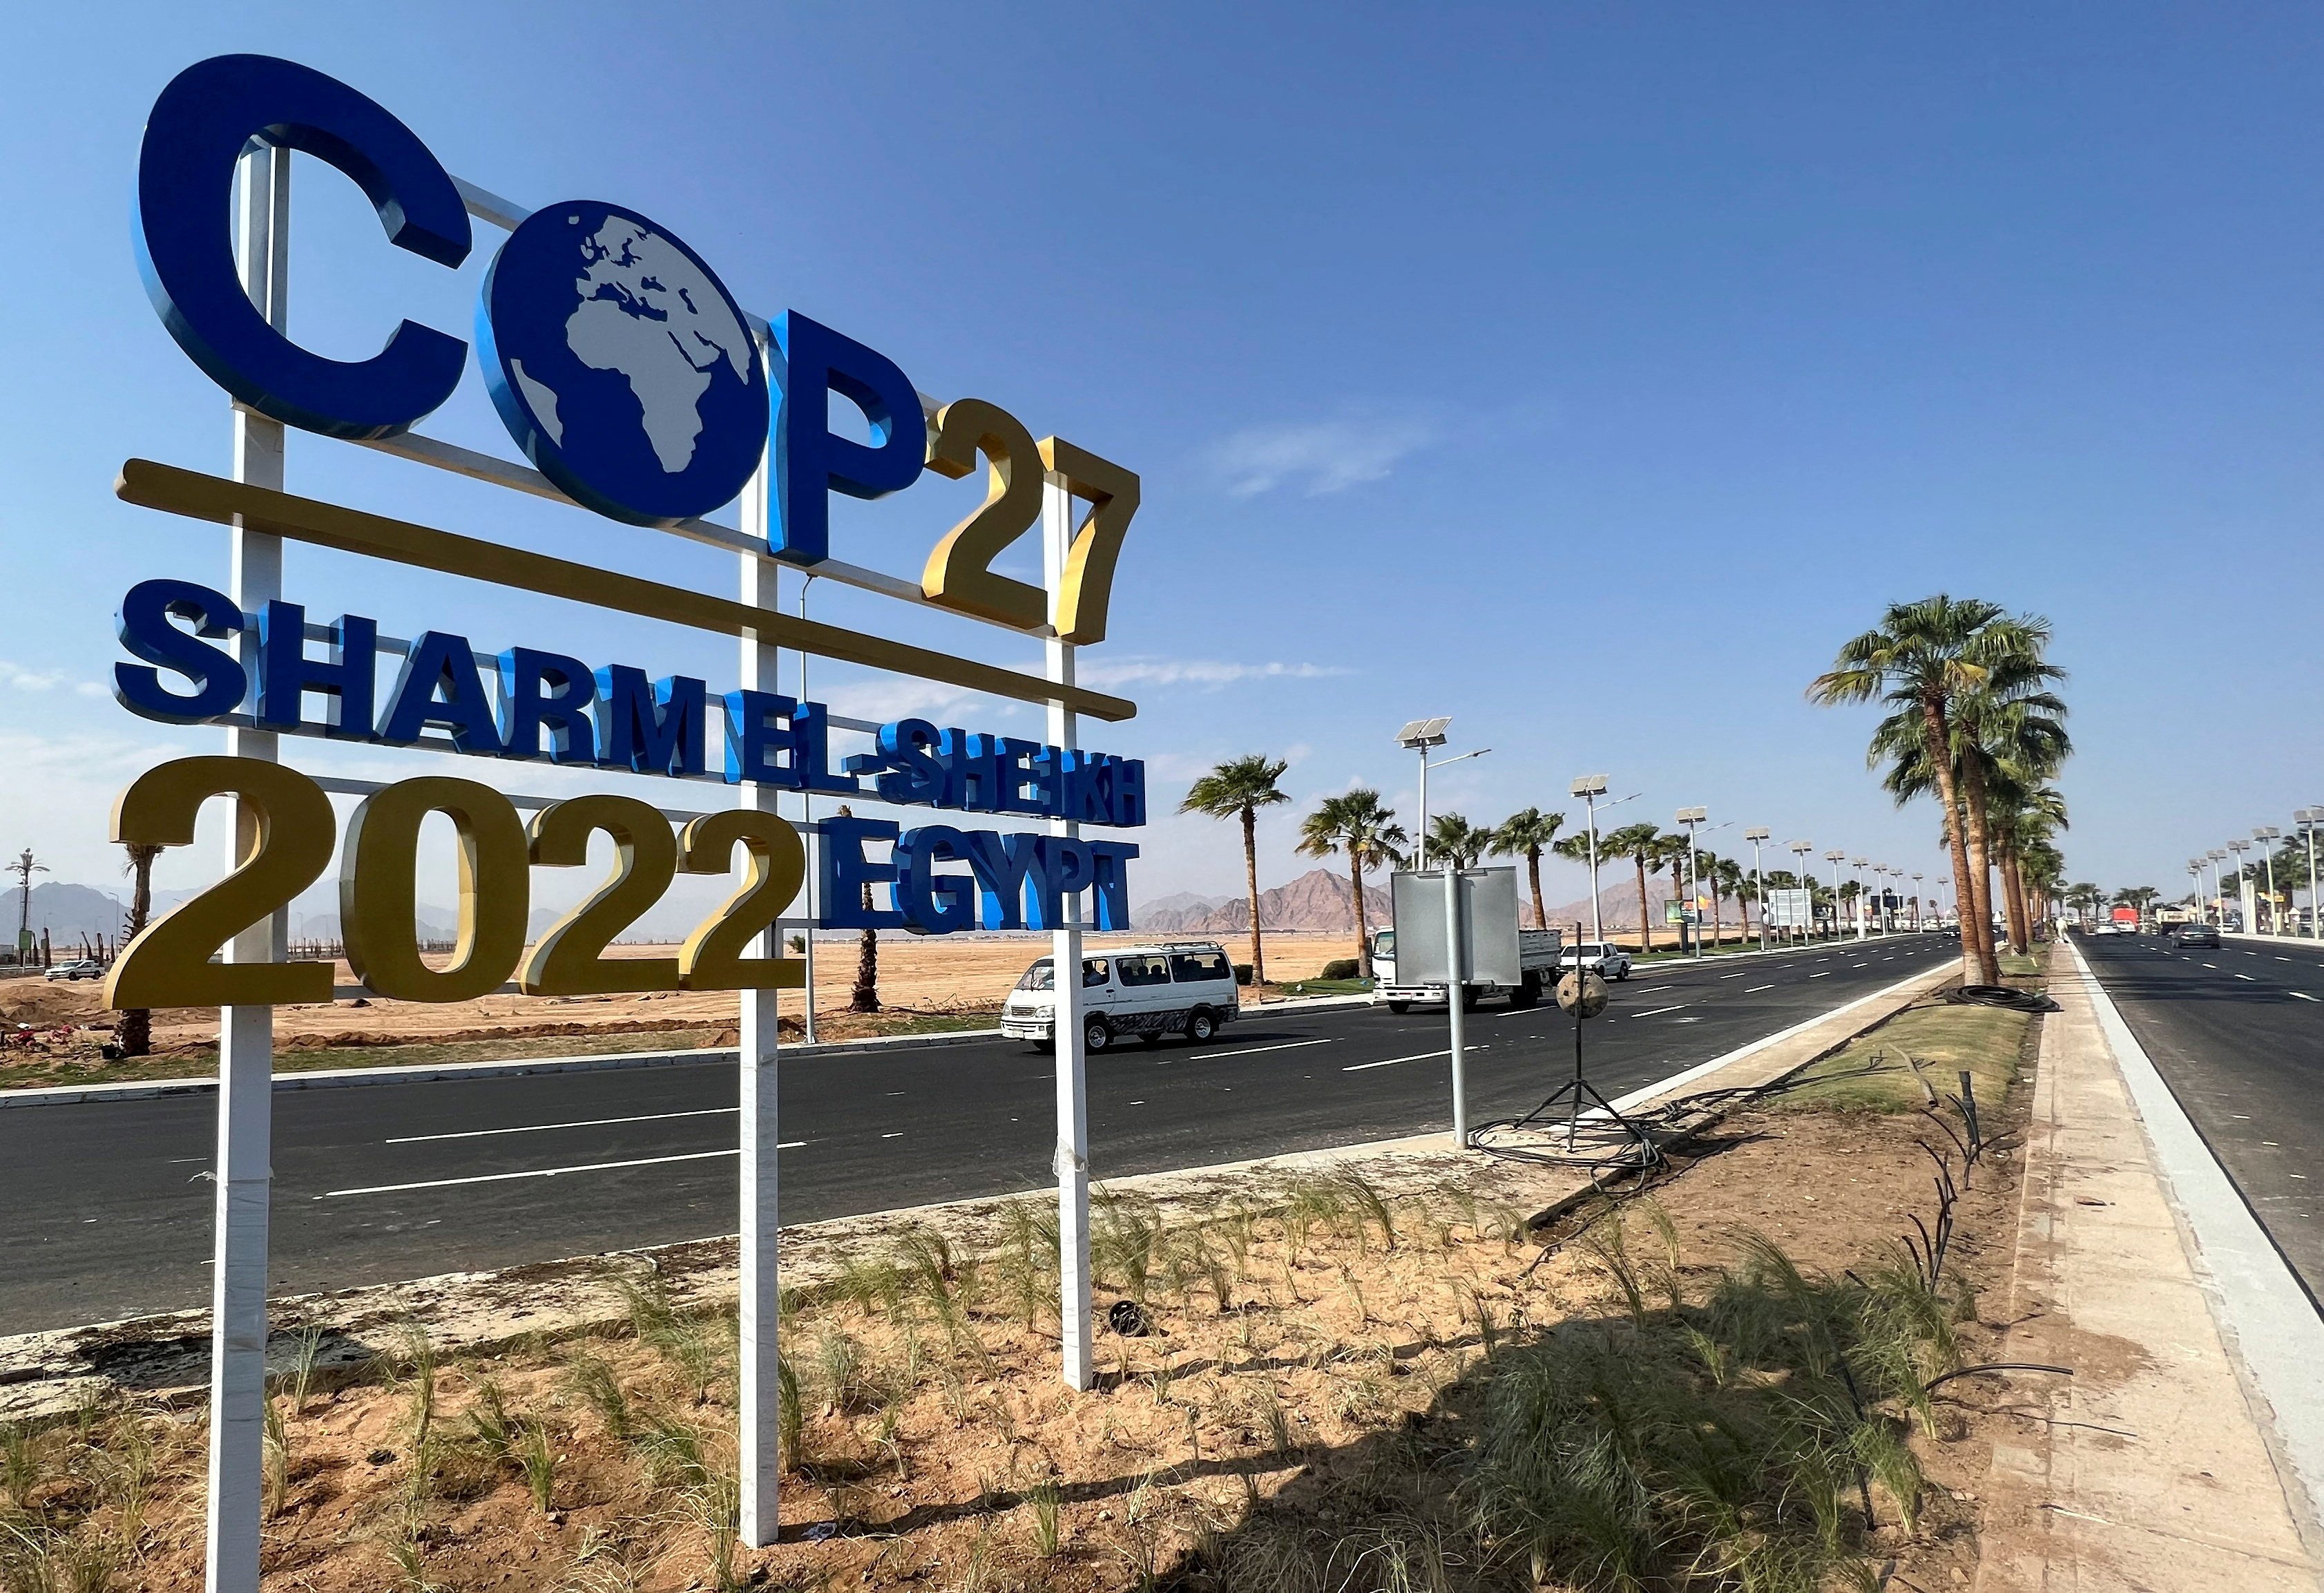 The COP27 sign is displayed along a road leading to the conference area in Egypt's Red Sea resort of Sharm el-Sheikh, the host of Nov.6-18 COP27 summit. (CNS/Reuters/Sayed Sheasha)